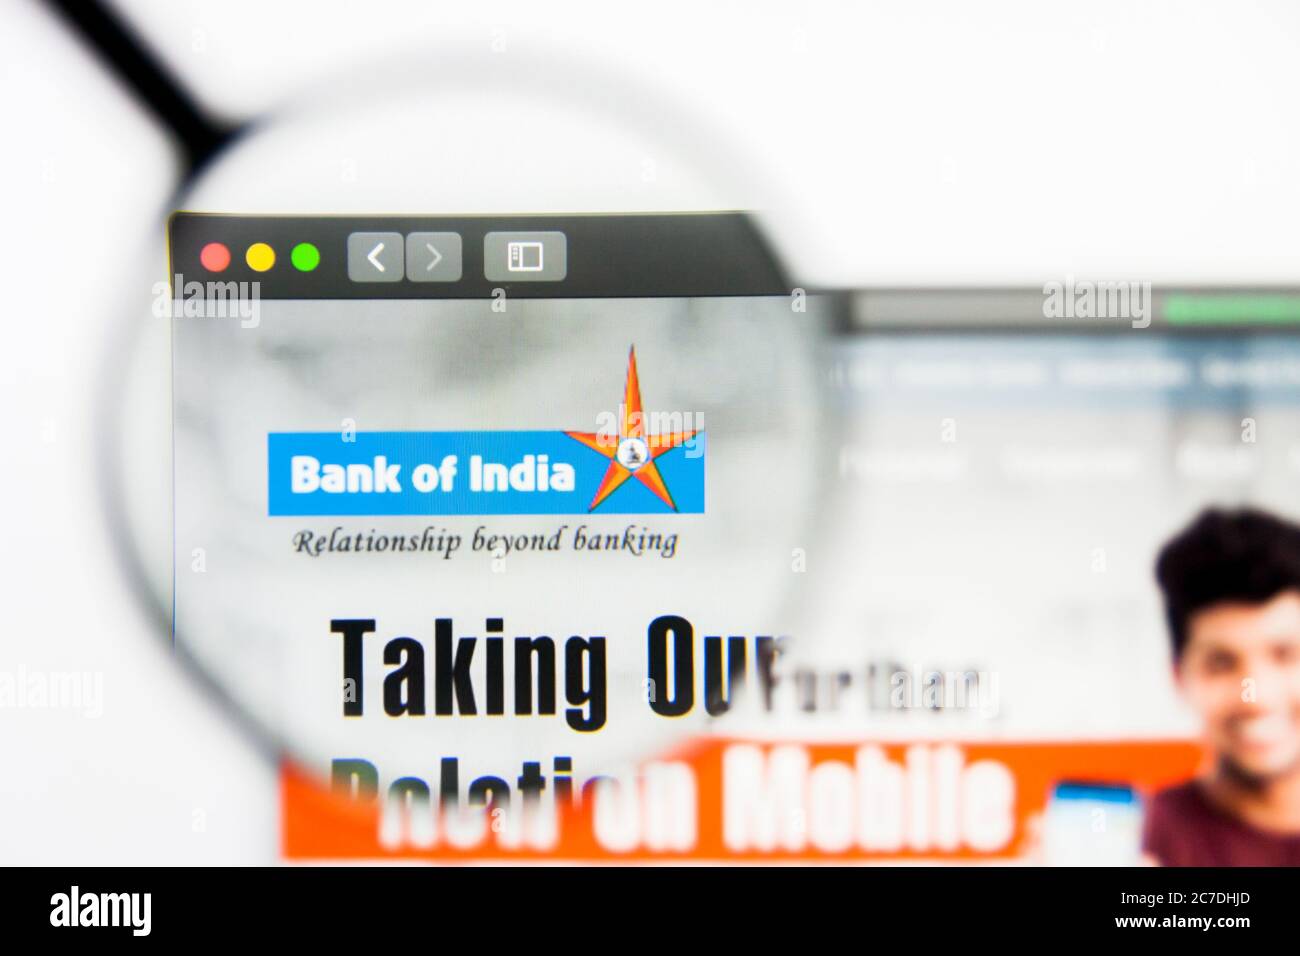 Los Angeles, California, USA - 24 March 2019: Illustrative Editorial of Bank of India website homepage. Bank of India logo visible on display screen. Stock Photo